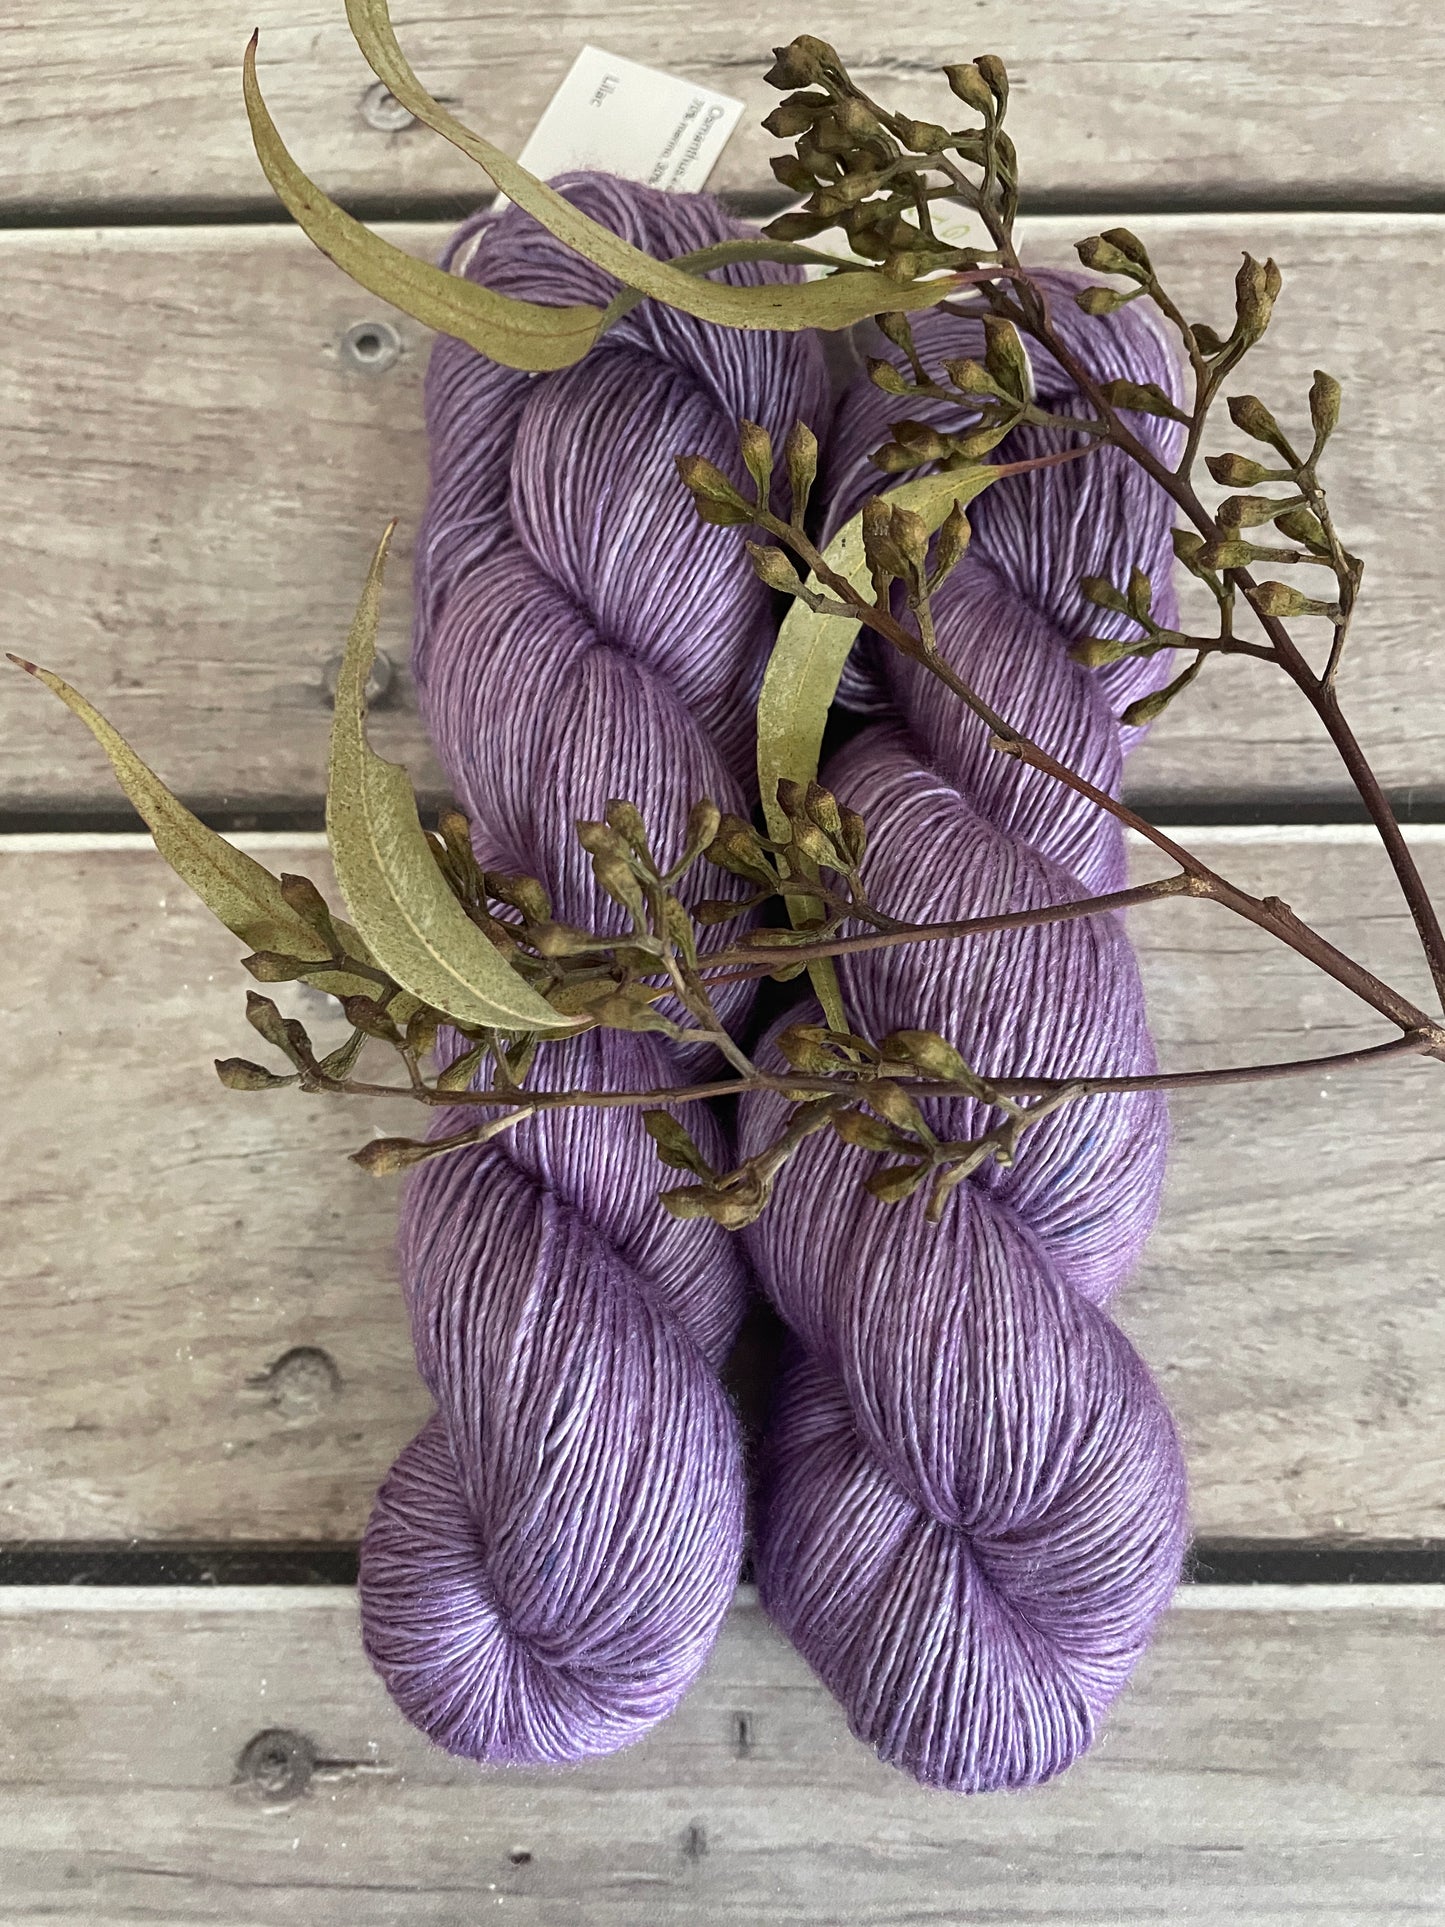 Lilac - 4 ply in Mulberry silk and Merino singles yarn - Osmanthus